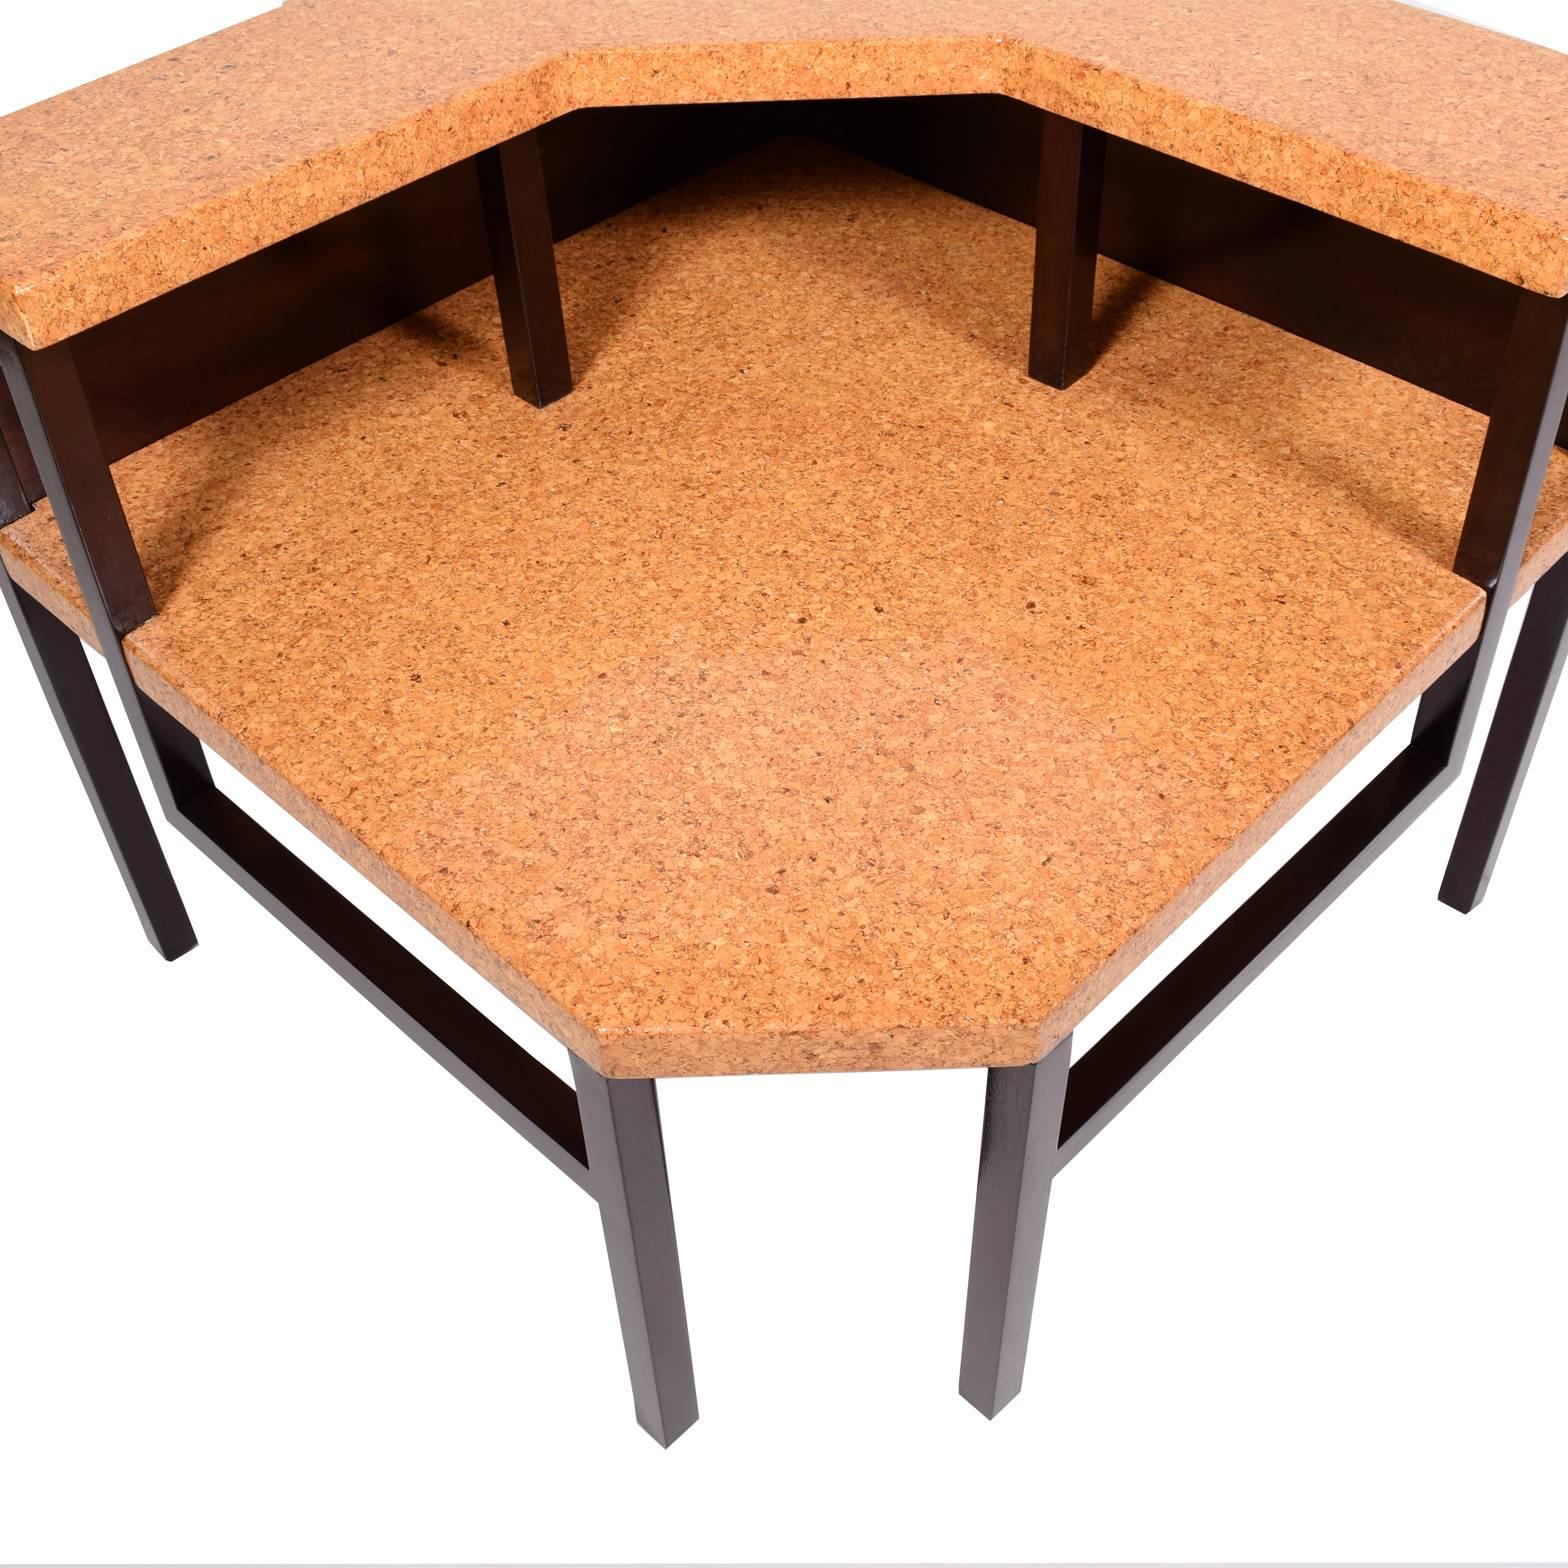 Mid-20th Century Corner Table by Paul Frankl for Johnson Furniture For Sale